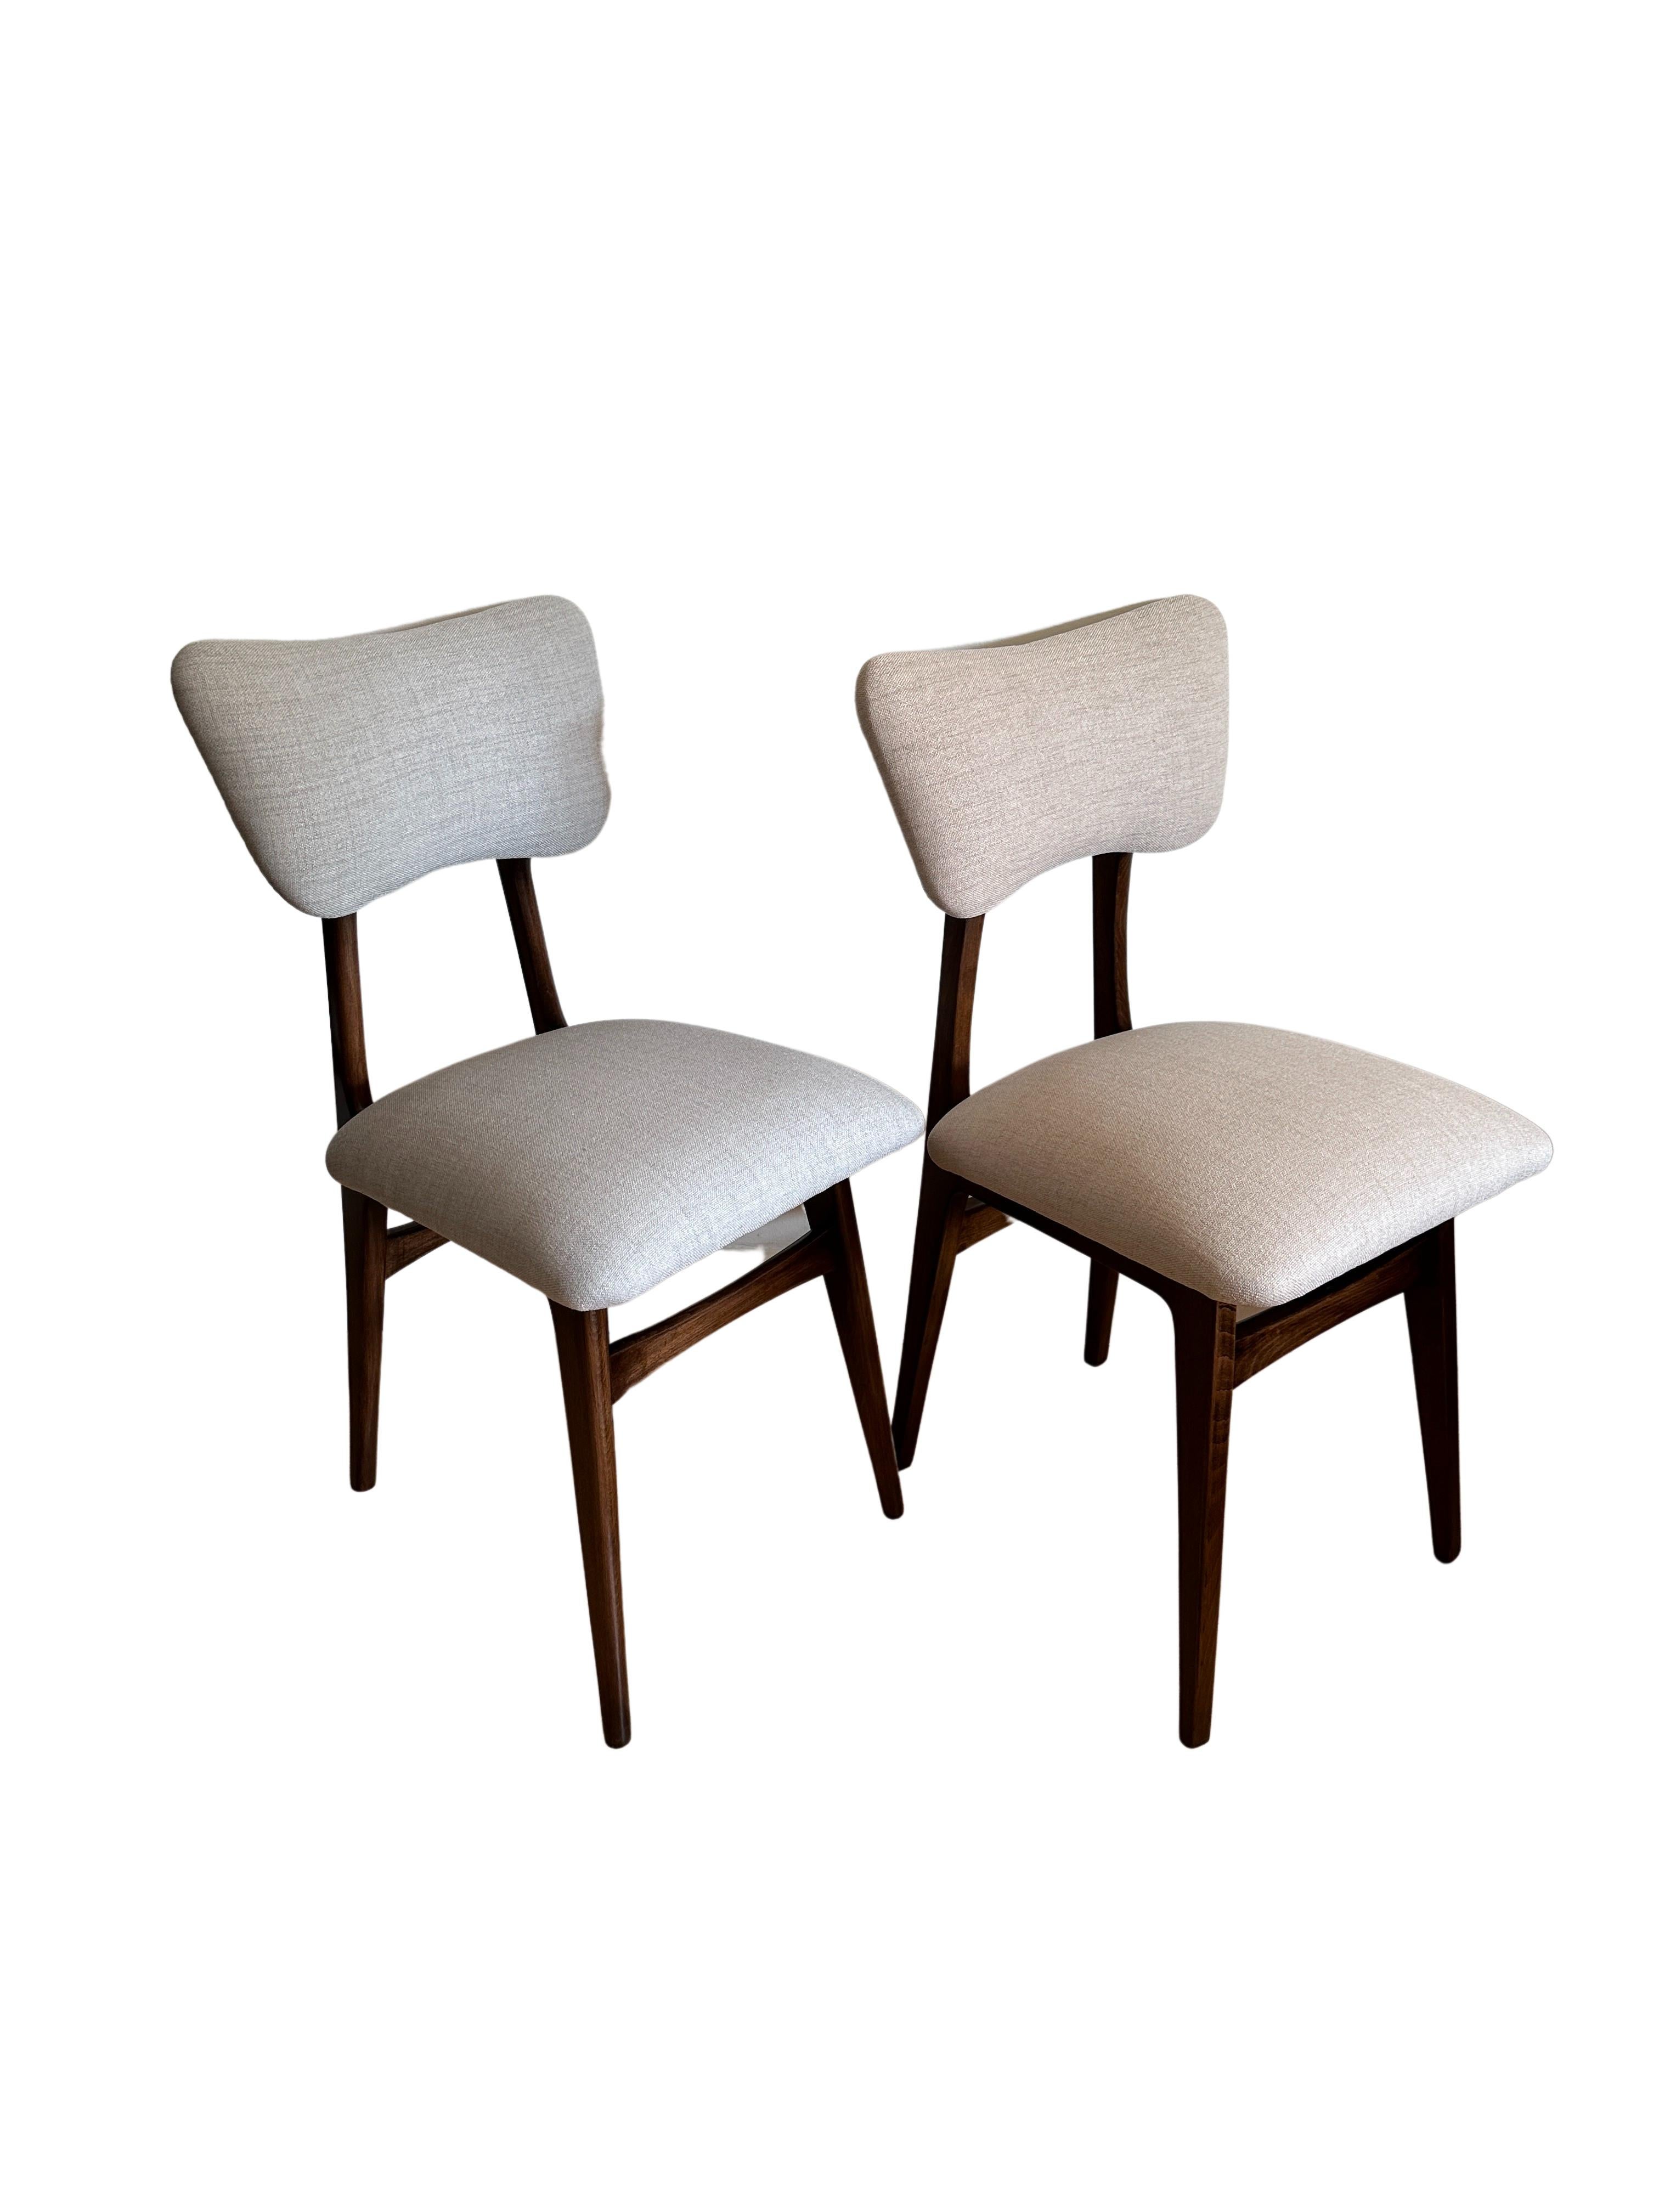 Mid-Century Modern Set of 2 Midcentury Beige and Grey Dining Chairs, Europe, 1960s For Sale